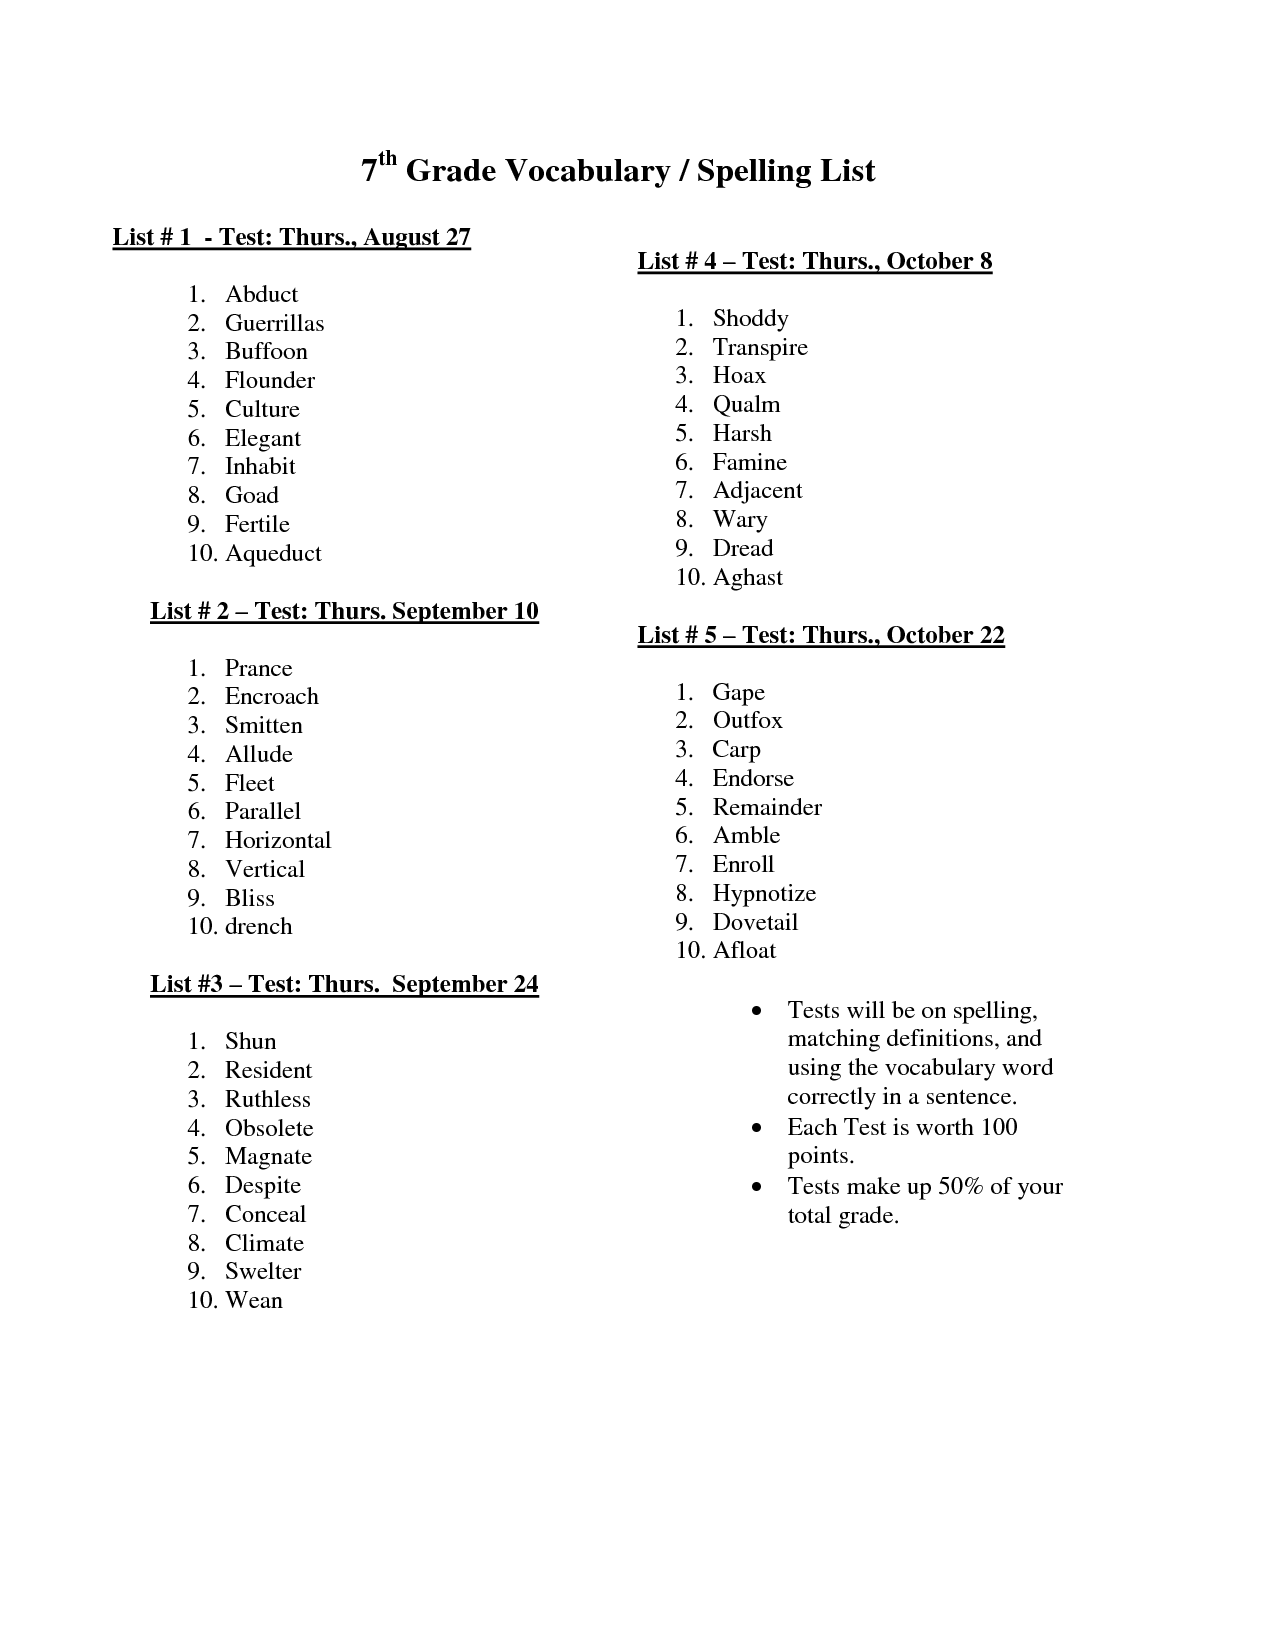 15-best-images-of-7th-grade-root-words-worksheets-7th-grade-spelling-words-7th-grade